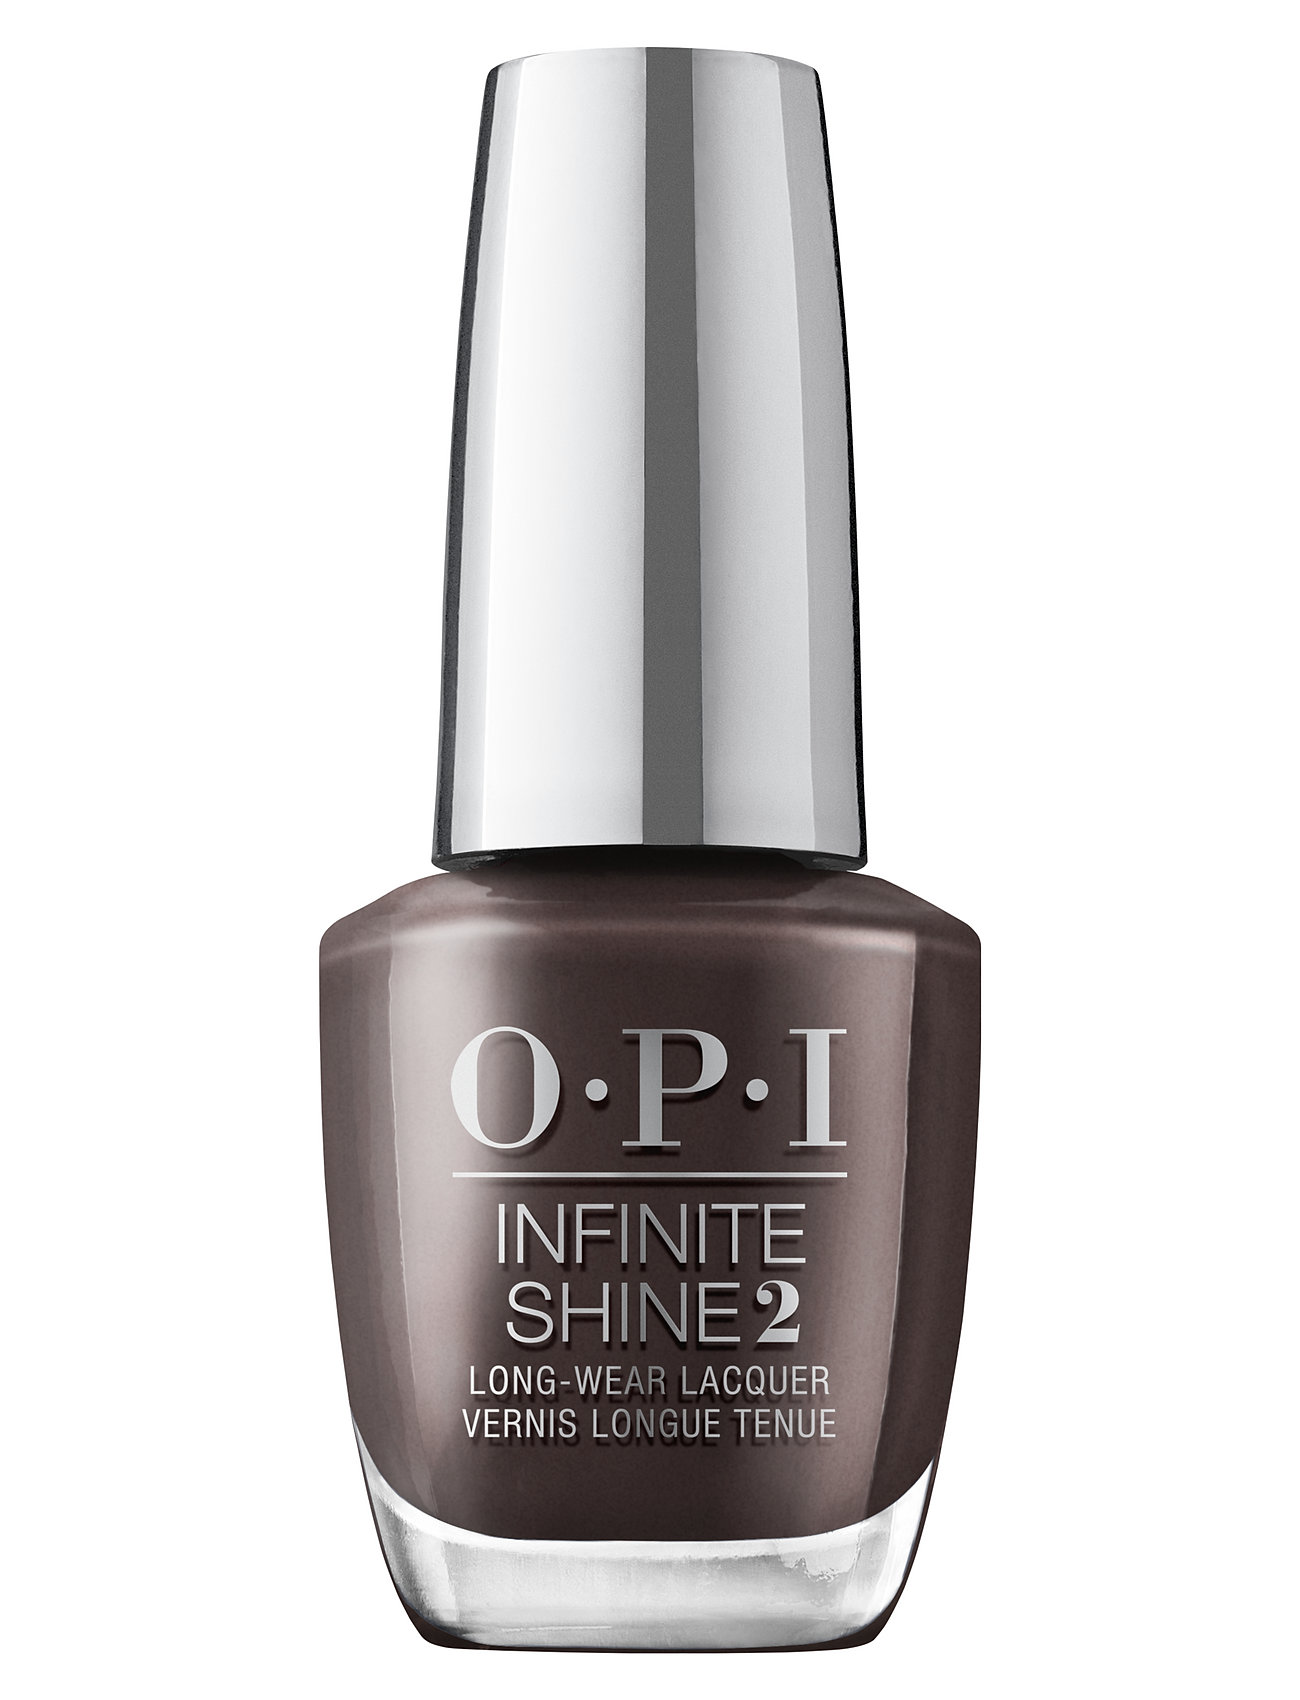 Is - Brown To Earth Nagellack Smink Black OPI